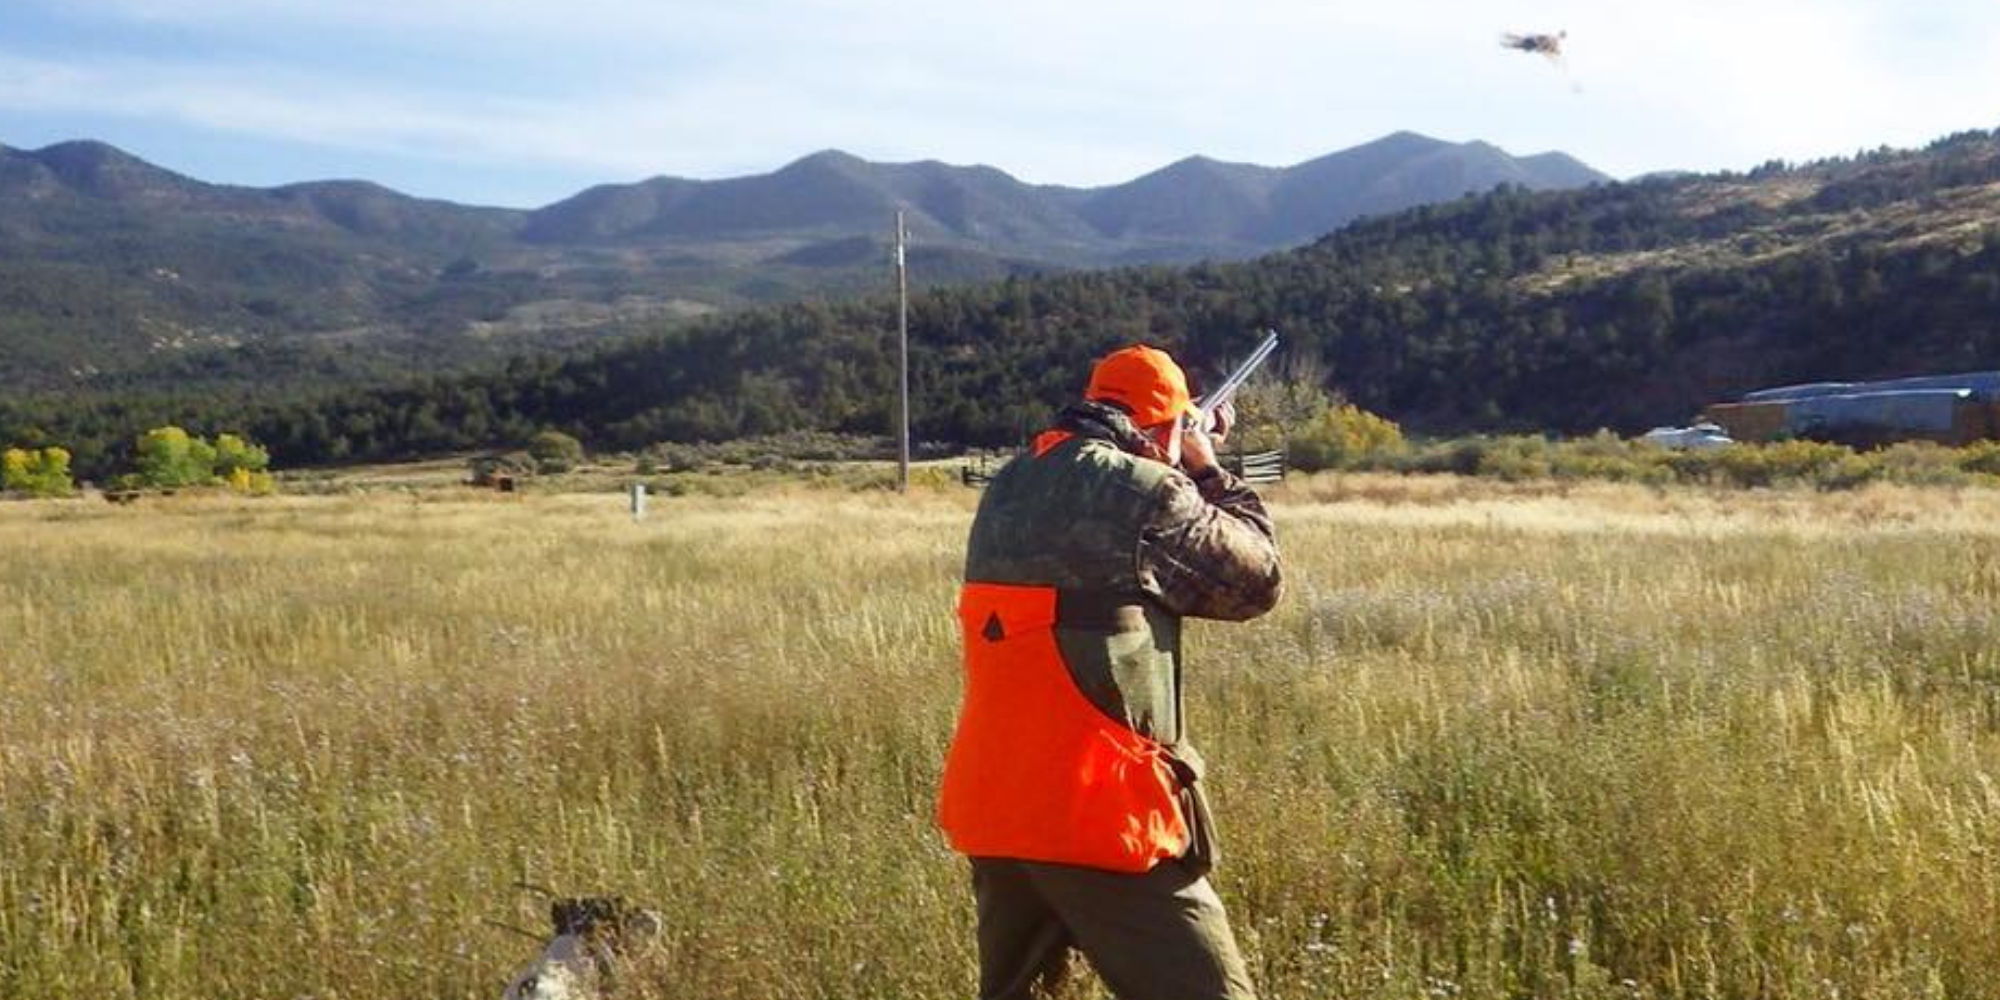 Orvis Endorsed Wing Shooting Lodge In Western Colorado | The High Lonesome Ranch